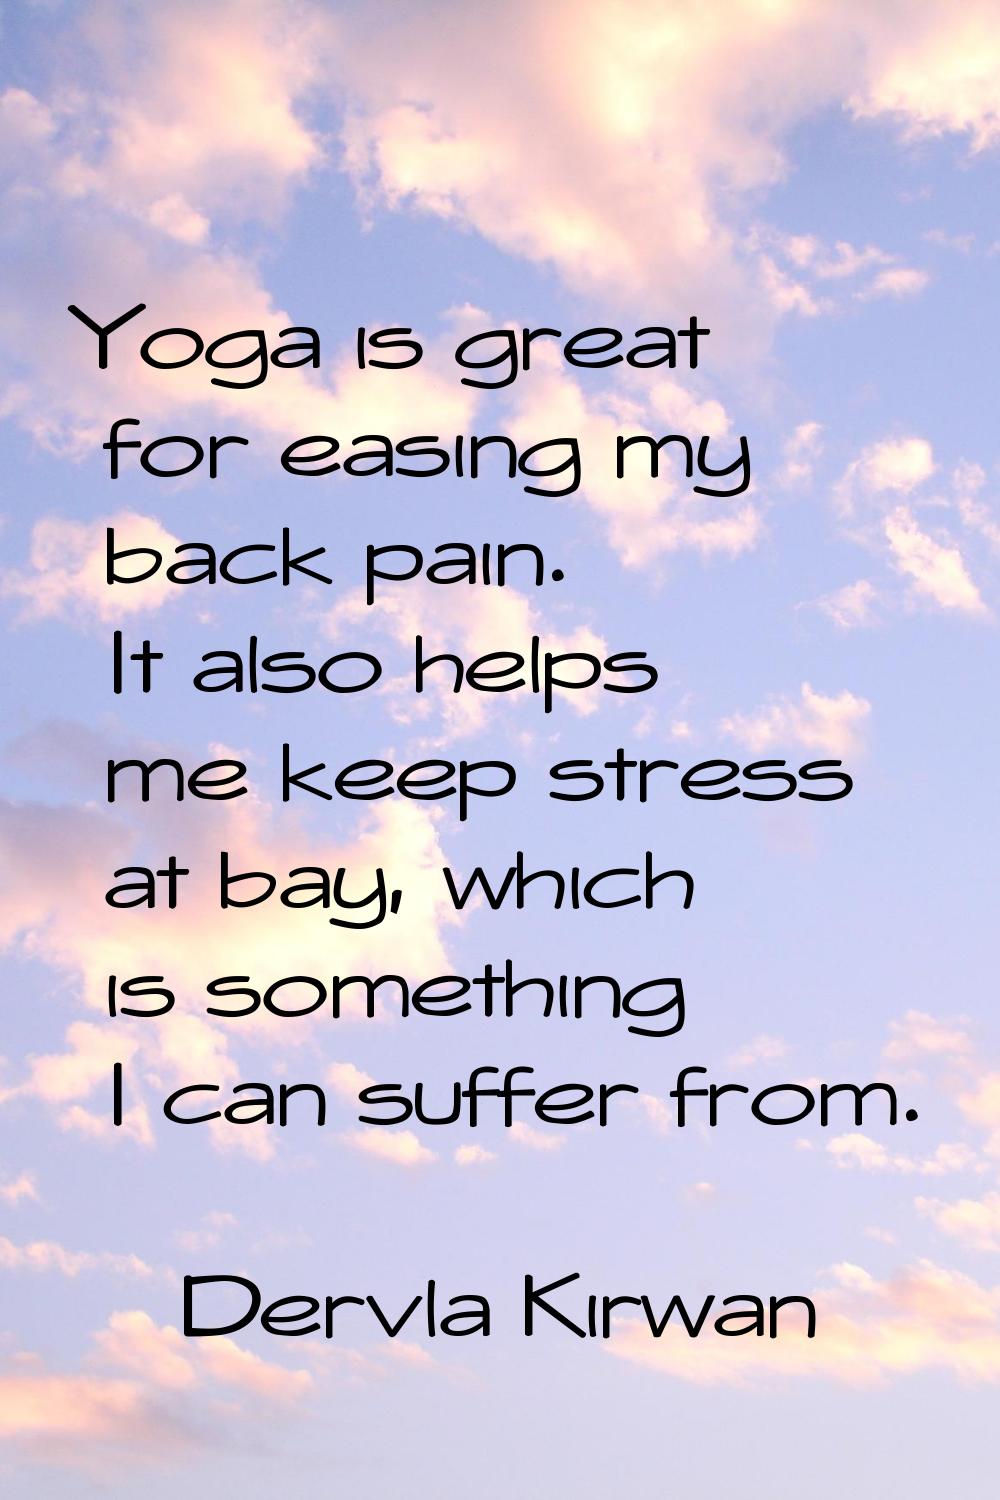 Yoga is great for easing my back pain. It also helps me keep stress at bay, which is something I ca